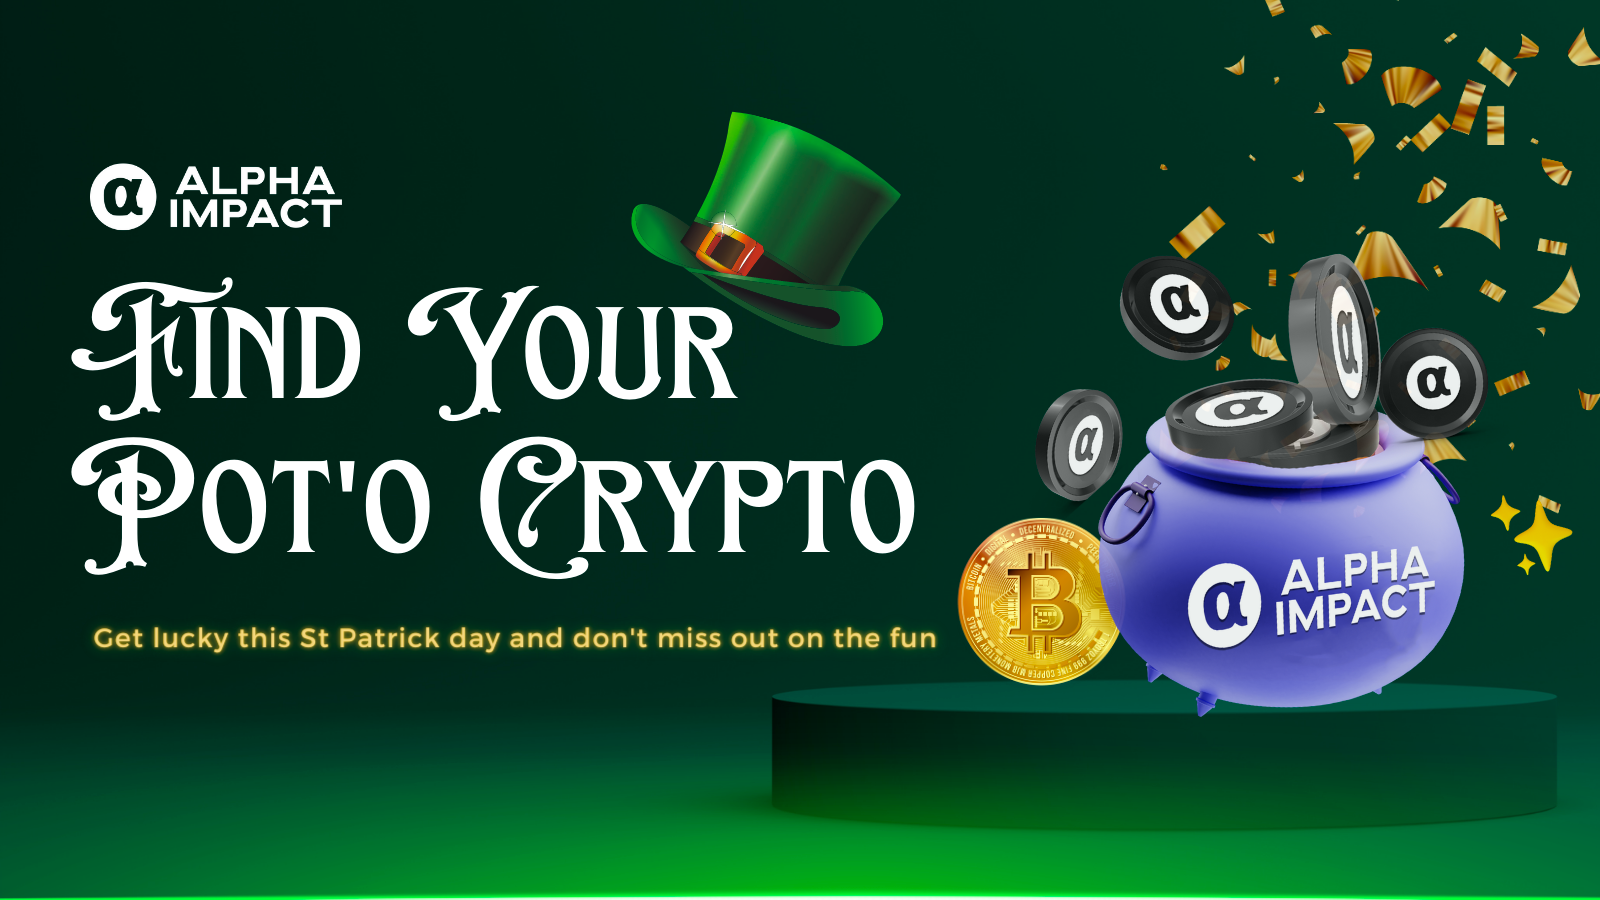 St Patrick's Day 2023: Find your Pot o' Crypto at the End of the Rainbow Promotion